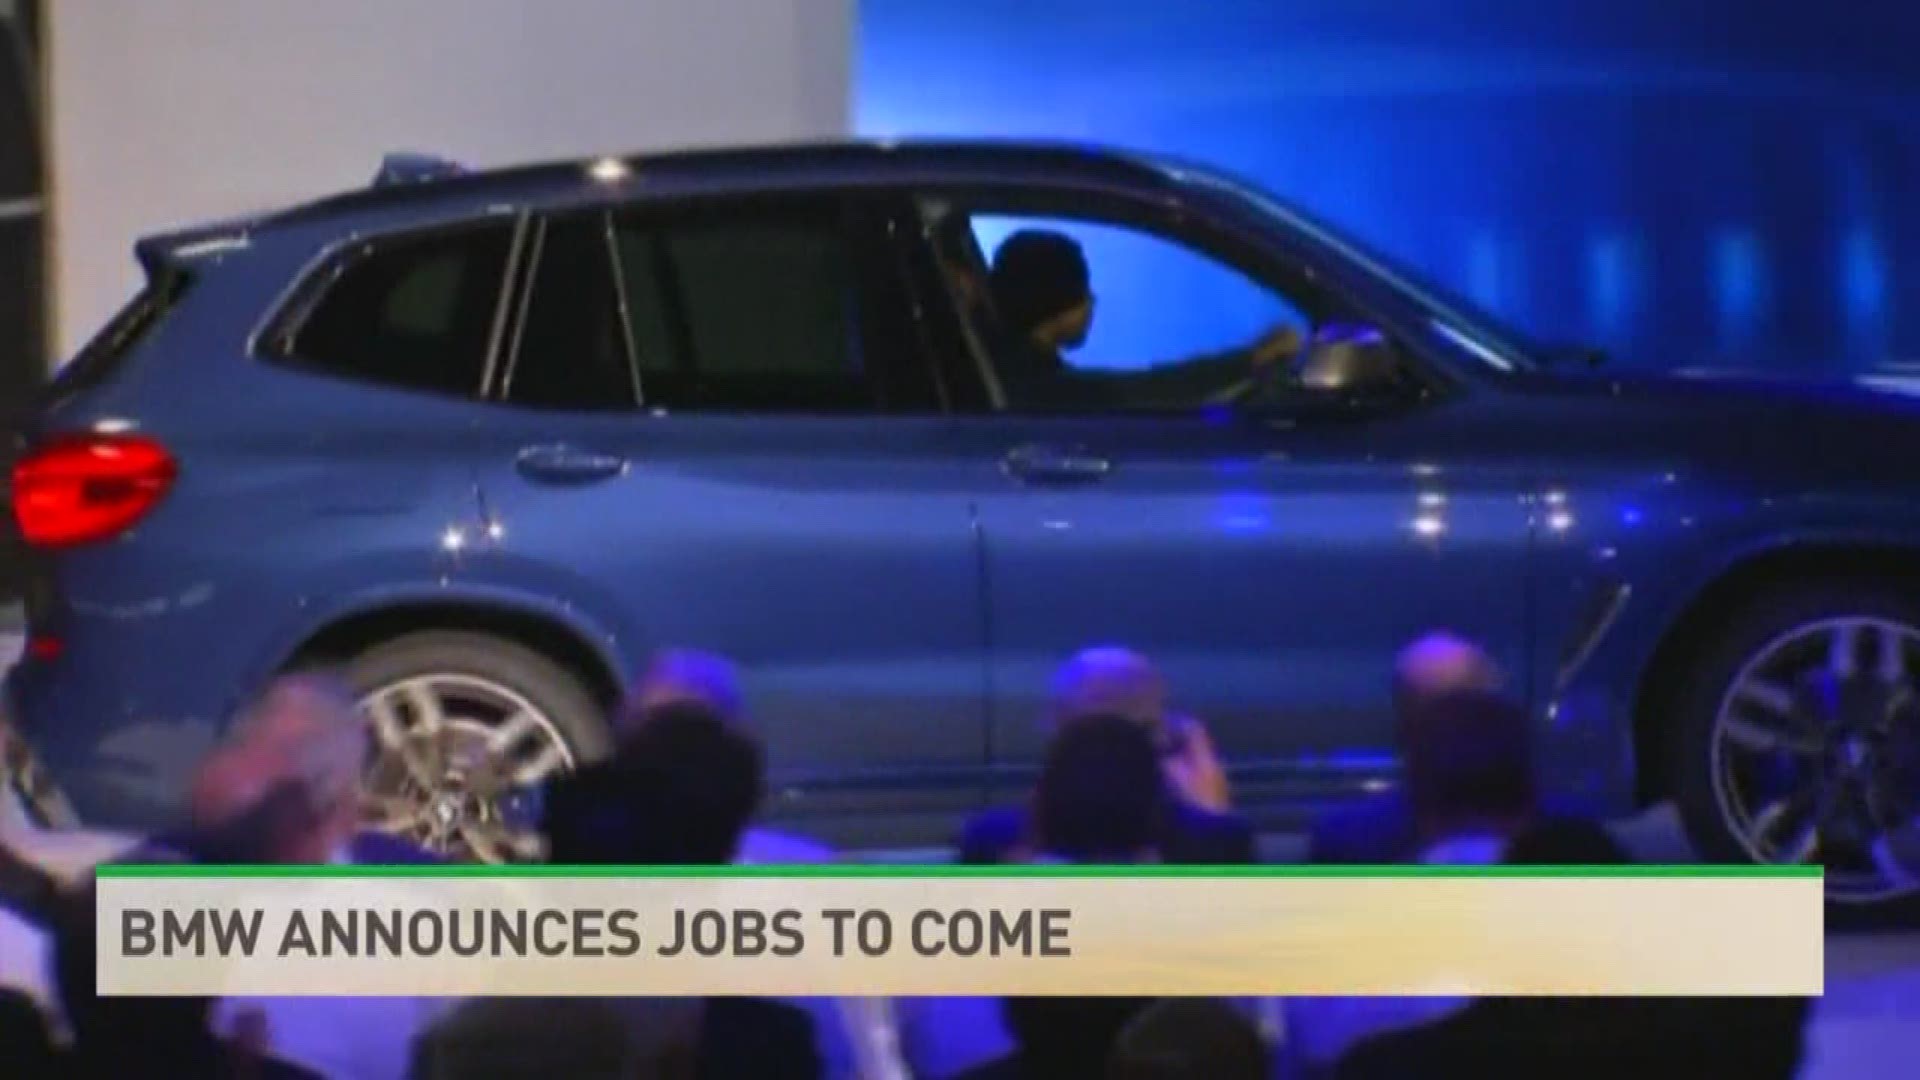 BMW announced a $600 million investment in their plant in Greer, SC.